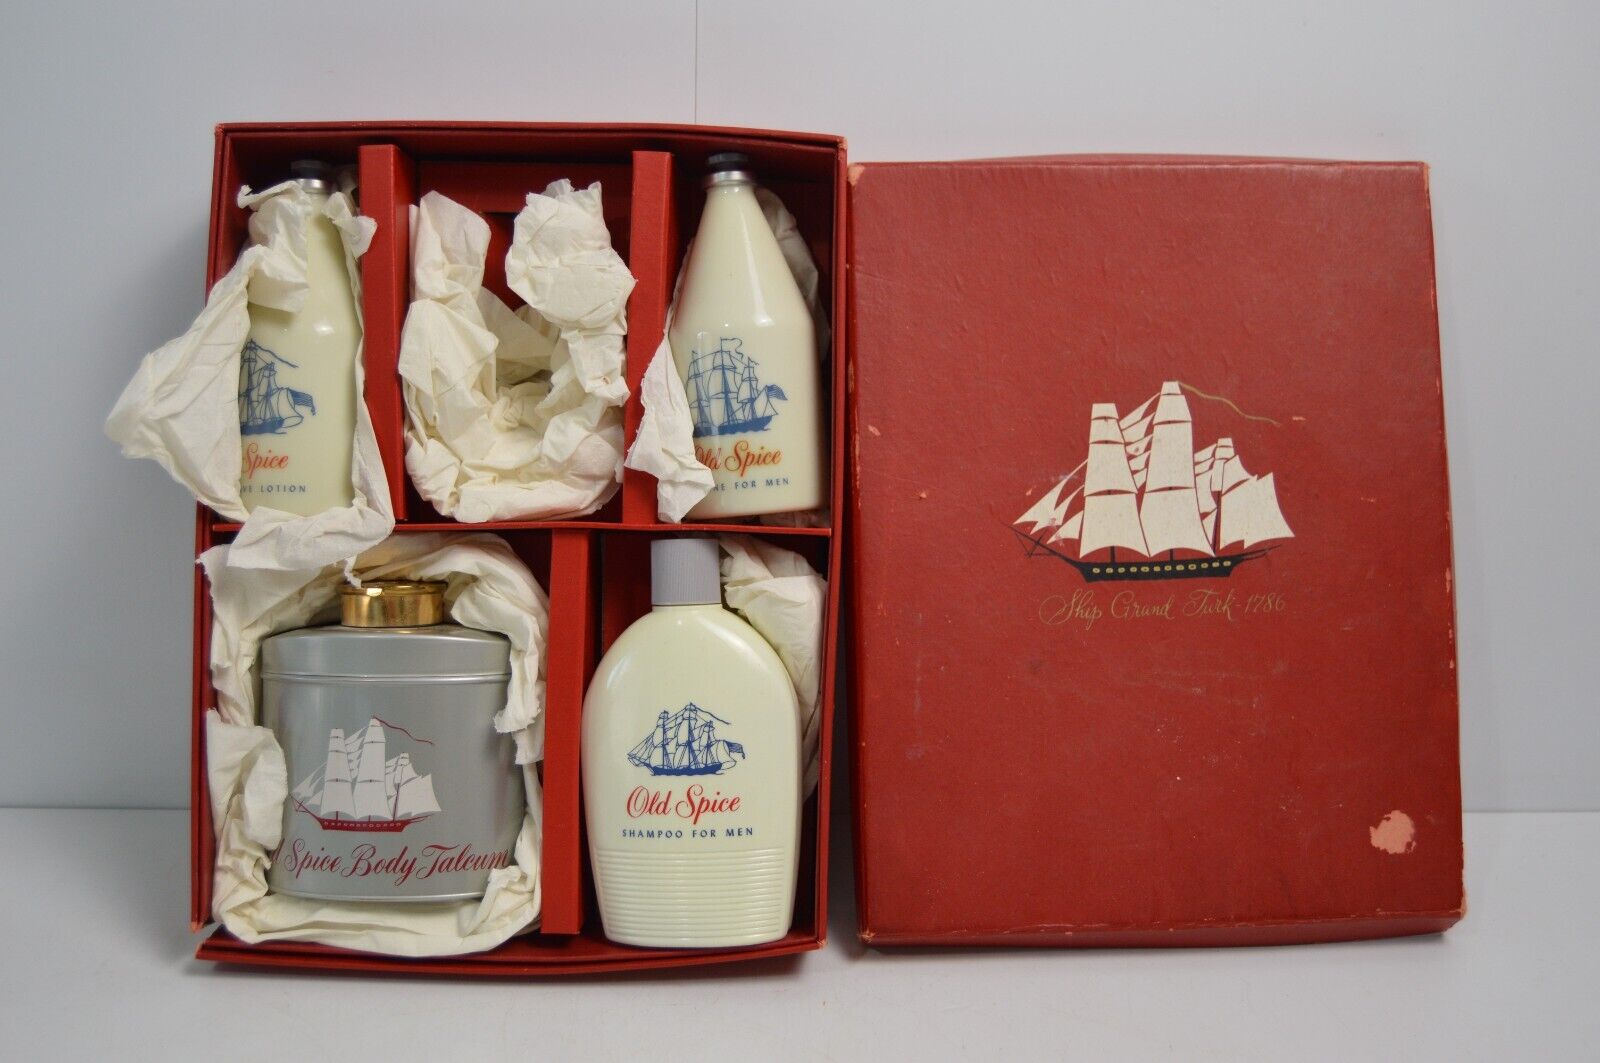 Vintage NOS Old Spice Ship Grand Turk 1786 Gift Set Box (No. 351) Early American